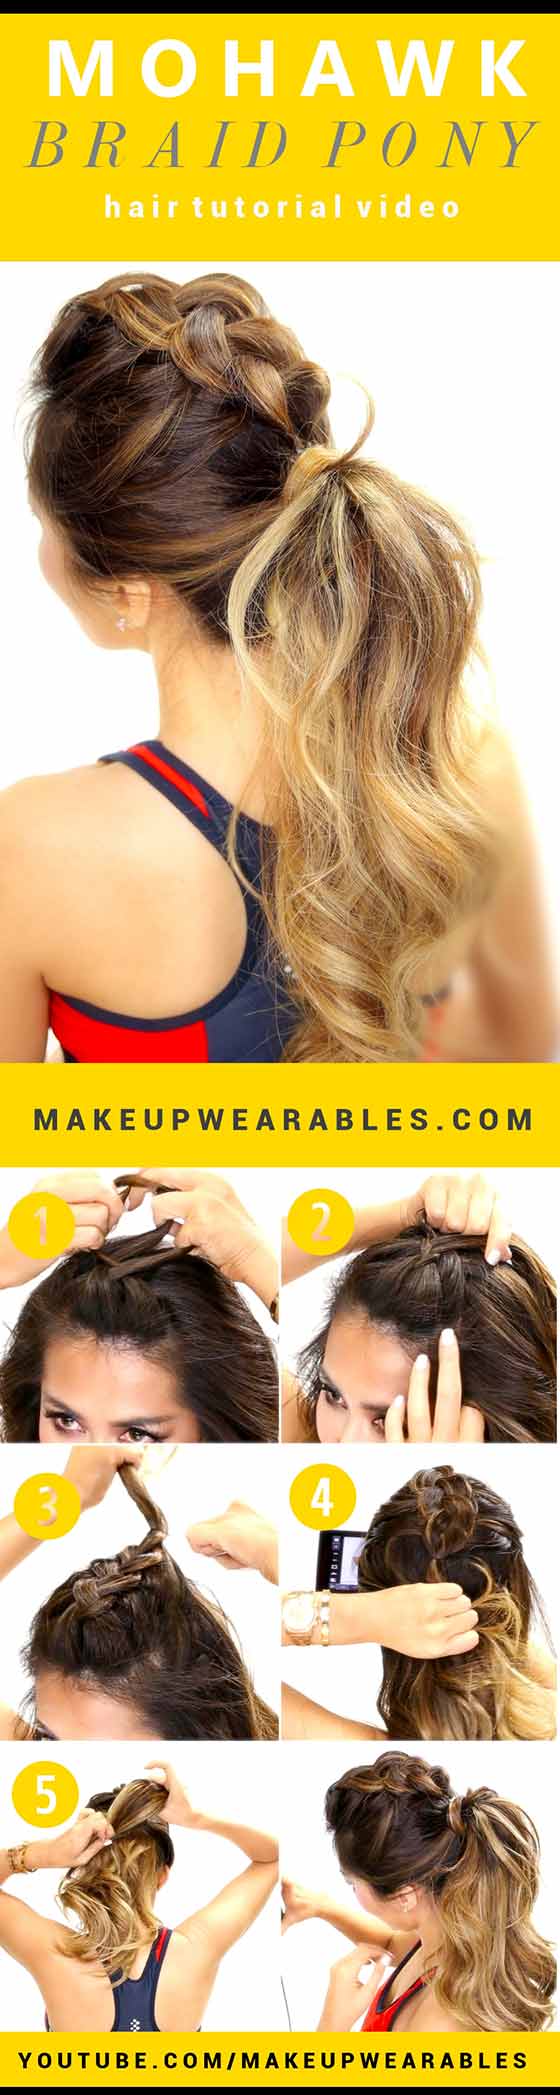 Mohawk braid ponytail braided hairstyle for long hair